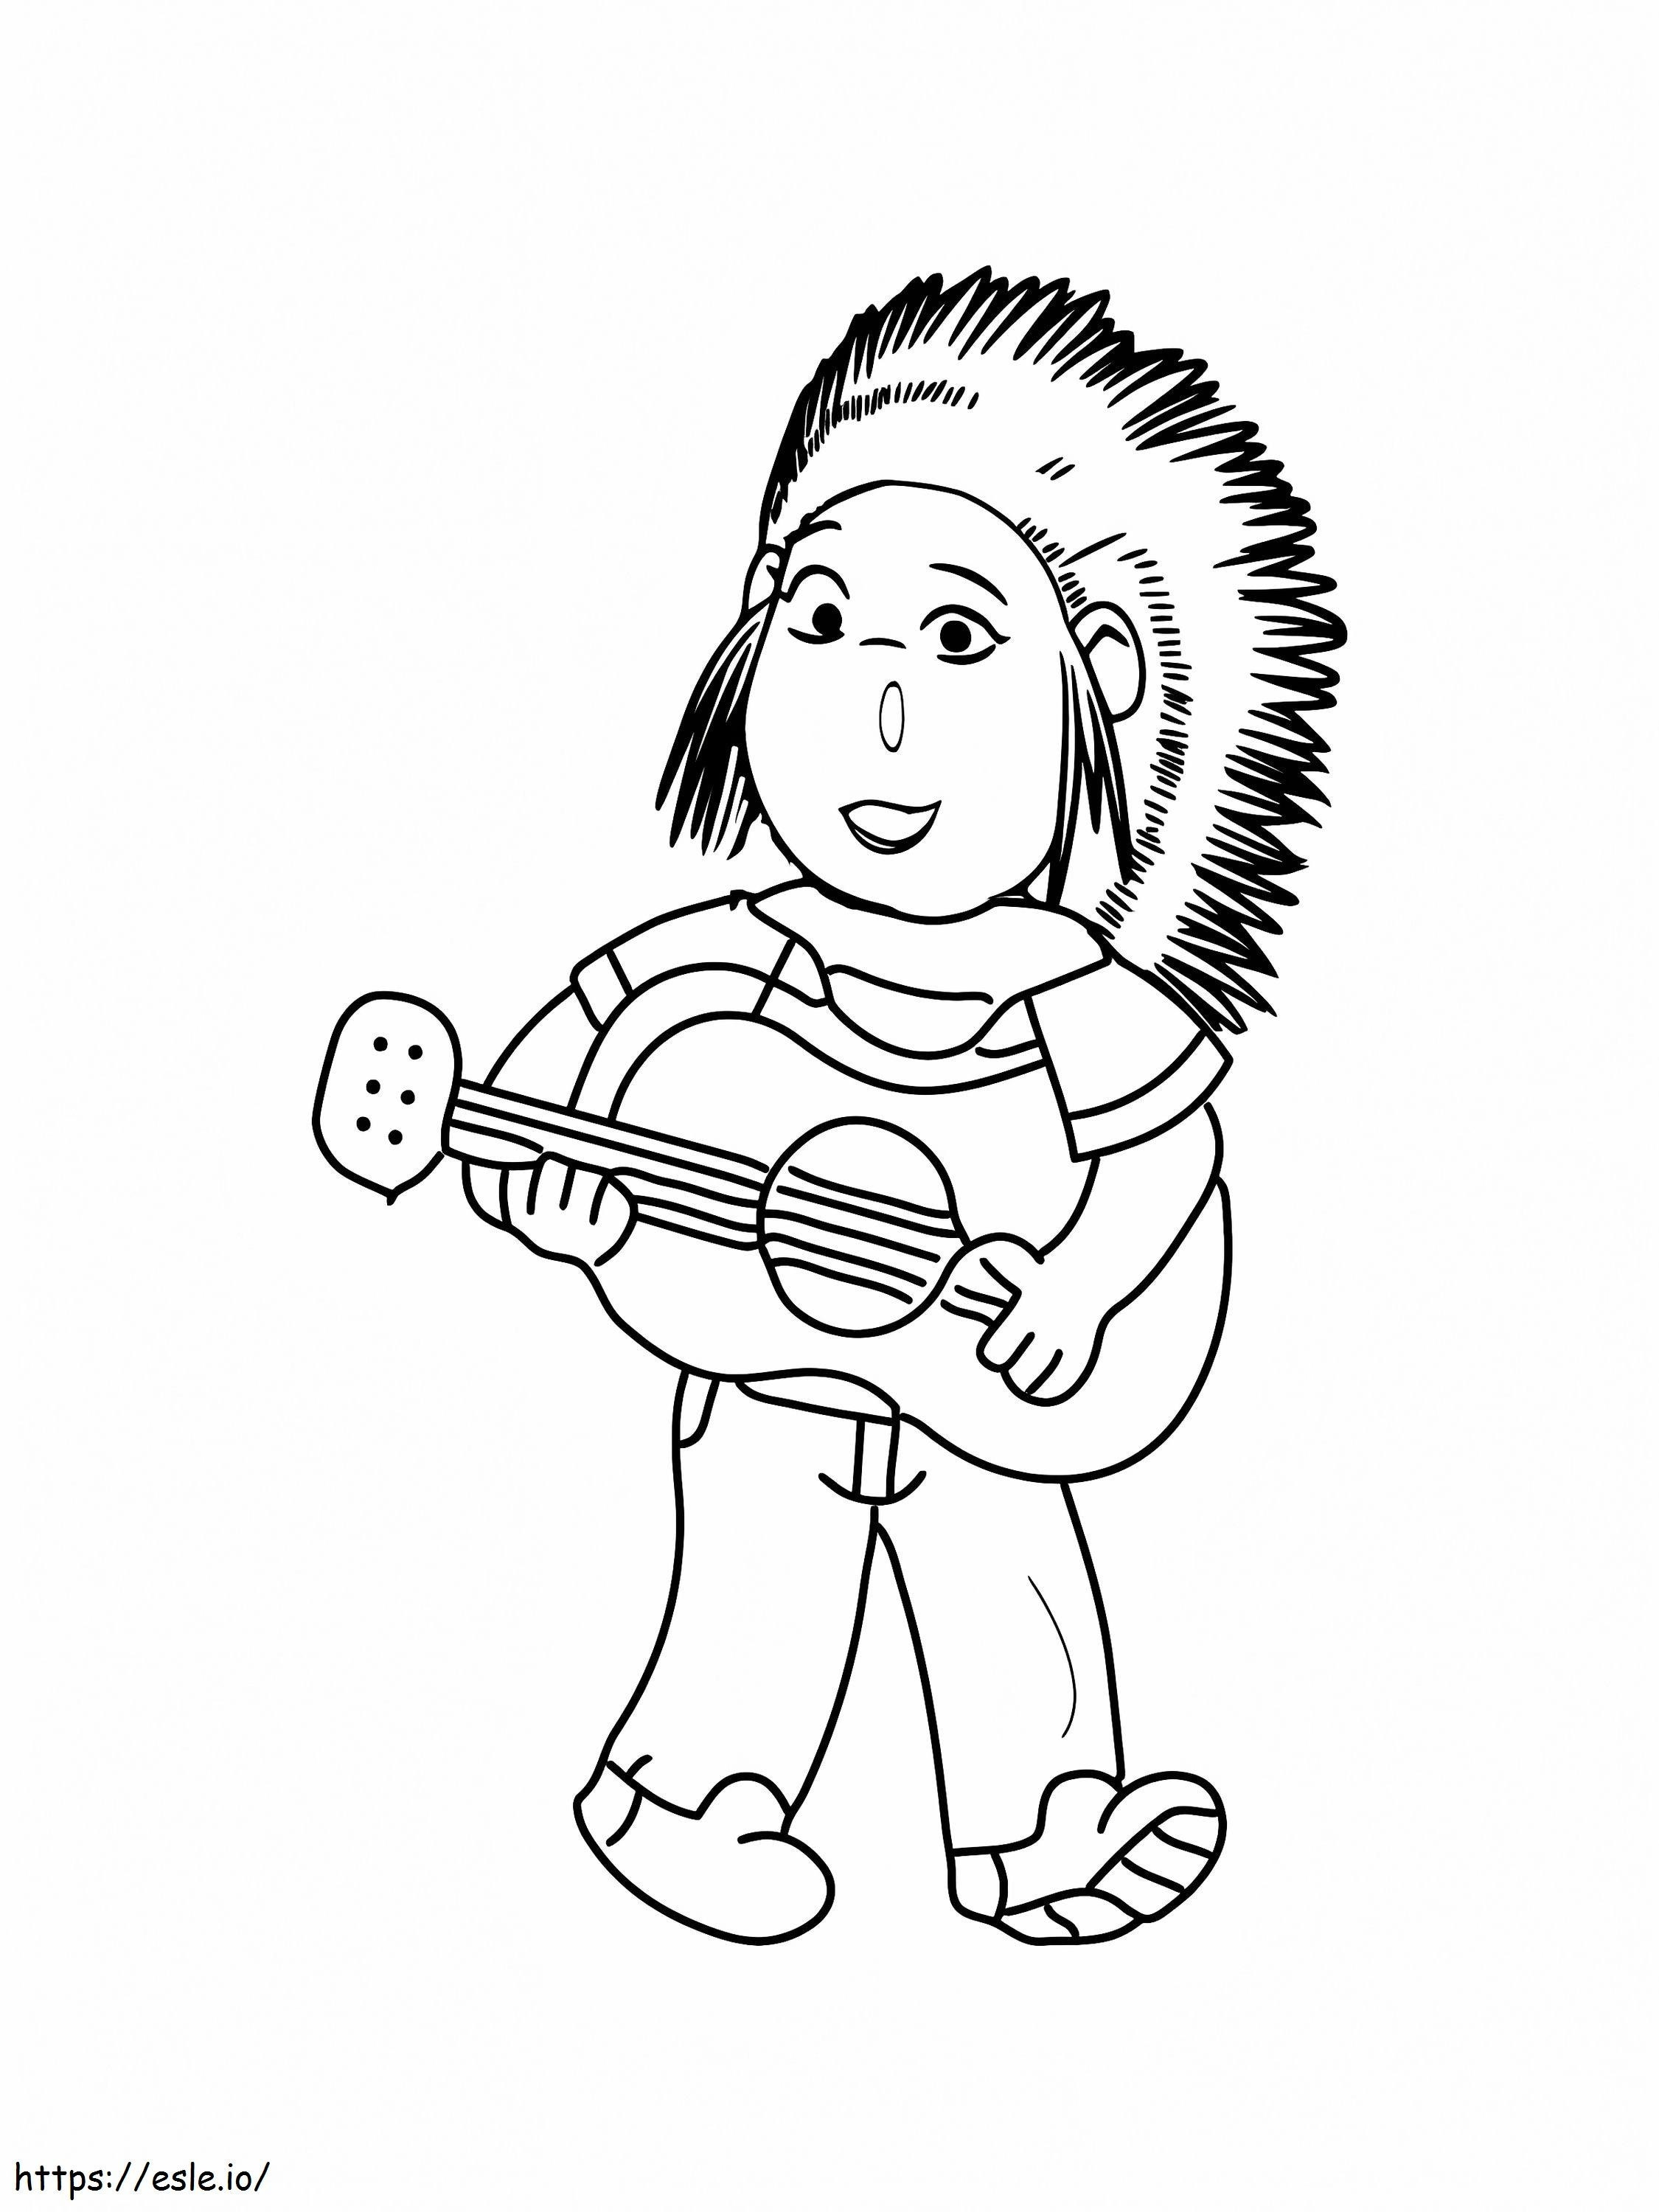 Cute Ash And Guitar coloring page